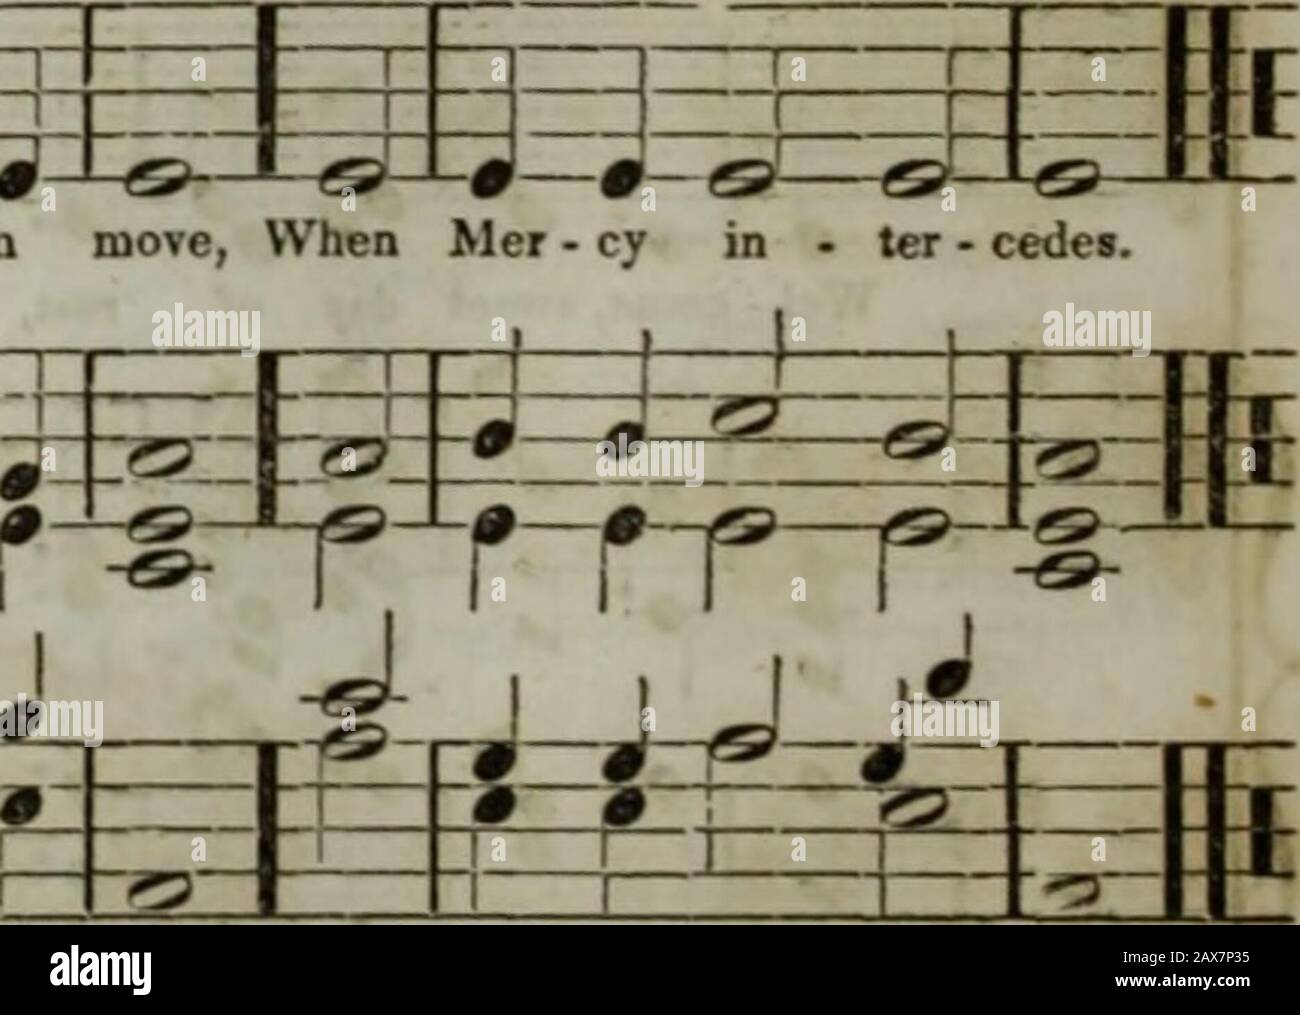 The Boston Musical Education Society's collection of church music : consisting of original psalm and hymn tunes, select pieces, chants, &c.; including compositions adapted to the service of the Protestant Episcopal Church . 50 ? NORTONS CHANT. C. M. S. IETCALP.. Mer • cy, descending from a - bove, -F soft - est accents pleads : O, may each tender bosom move, When Mer - cy in • ter - cedes. WA—P r-rn ? ill I I —»-b-2—Brr9—-m-w-m i   5j mm STAFFORD, L, P, M. Bp £. L WHITE. 183 up m How rich thy gifts, al - might - y King ! From thee our pub - lie bless - ings spring: Thextend - ed trade, the f Stock Photo